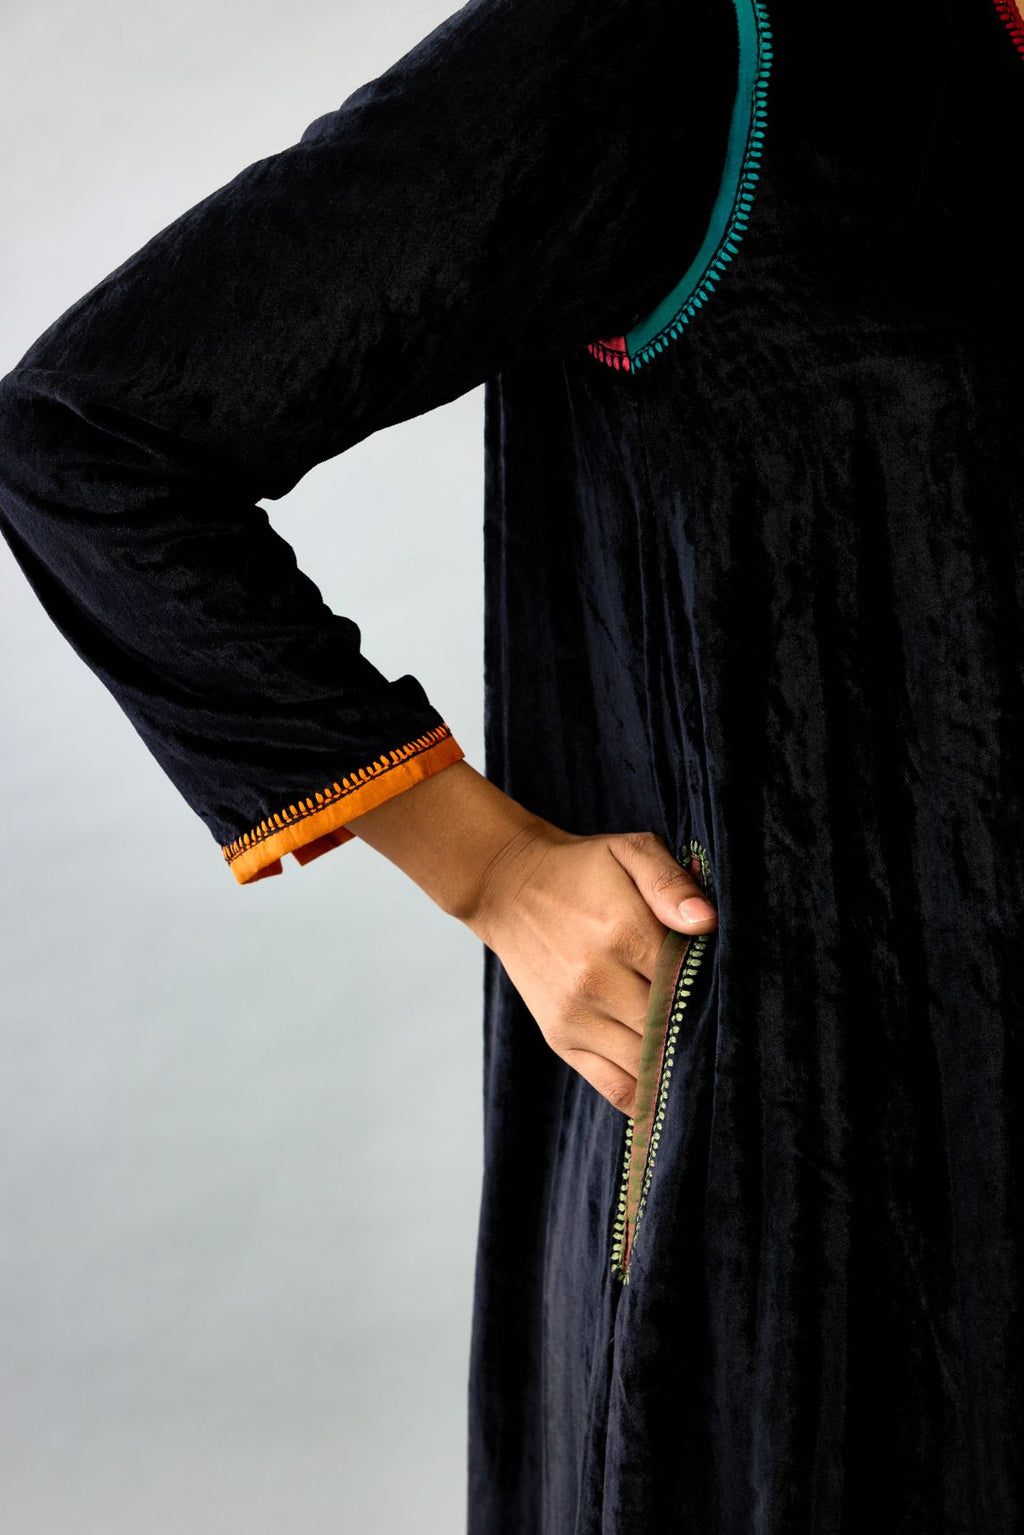 Black silk velvet long A-line kurta with multi colored silk facing and embroidery, paired with black silk velvet straight pants